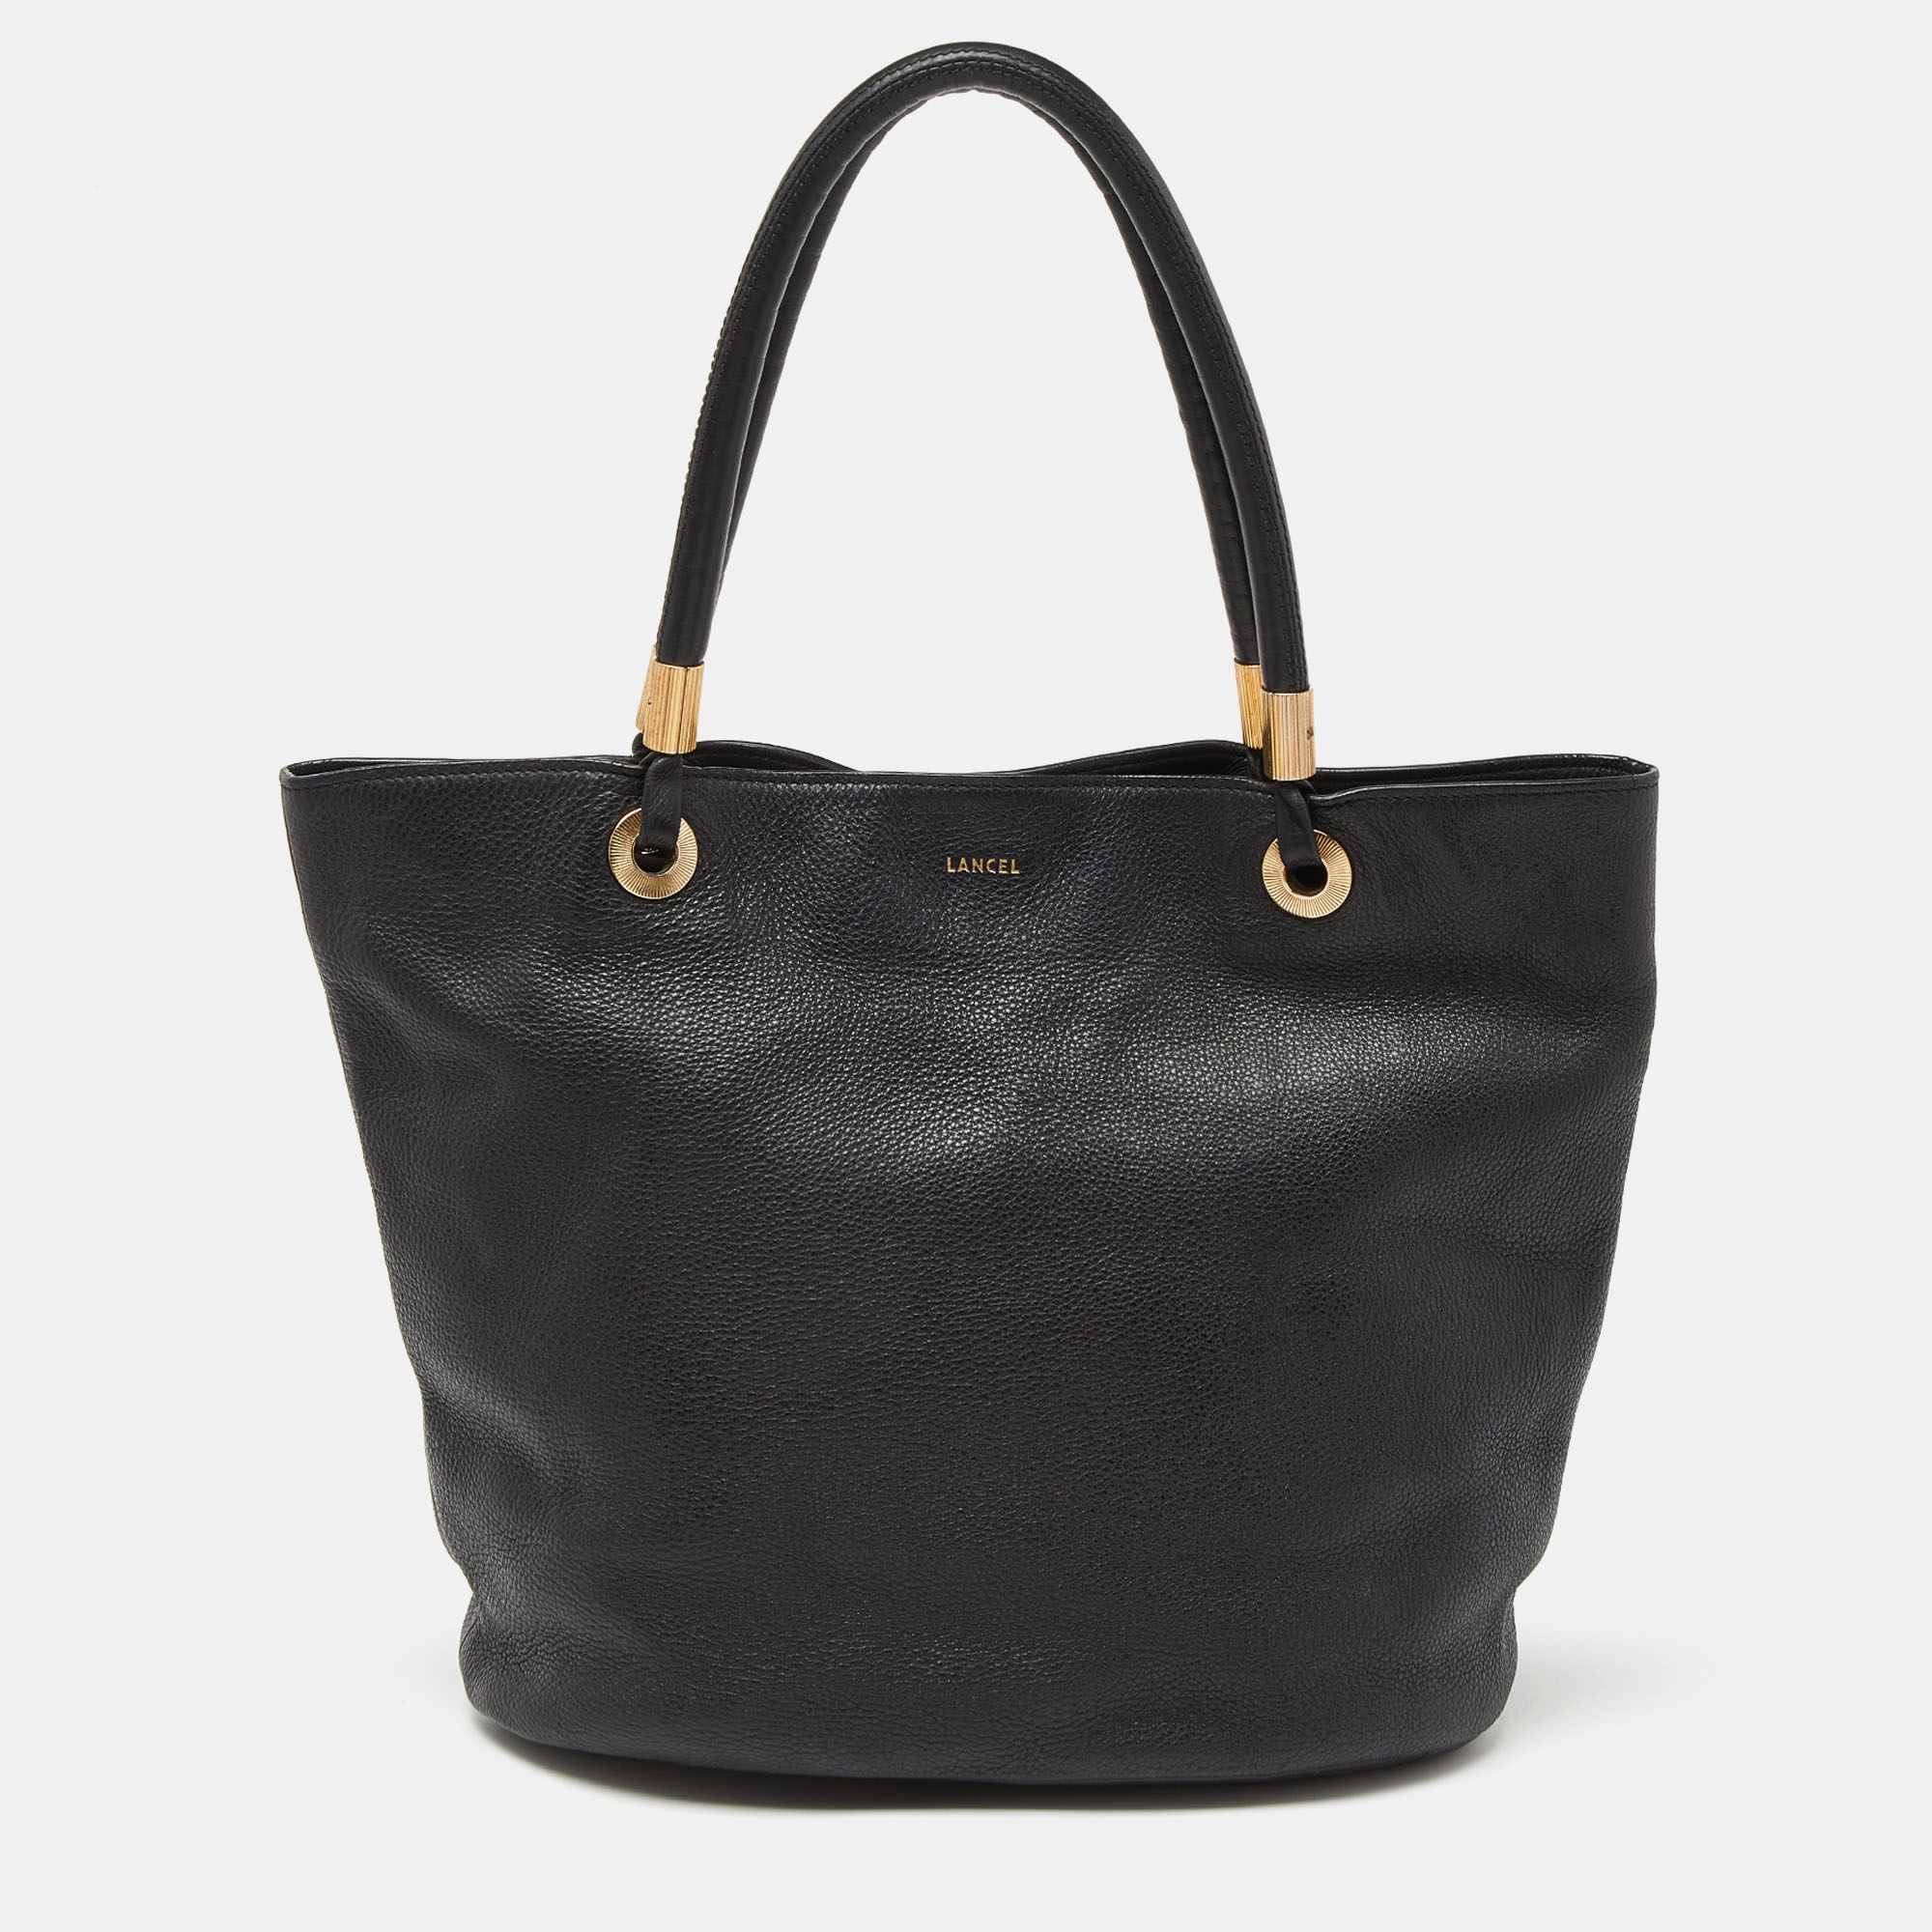 Pre-owned Lancel Black Leather Tote